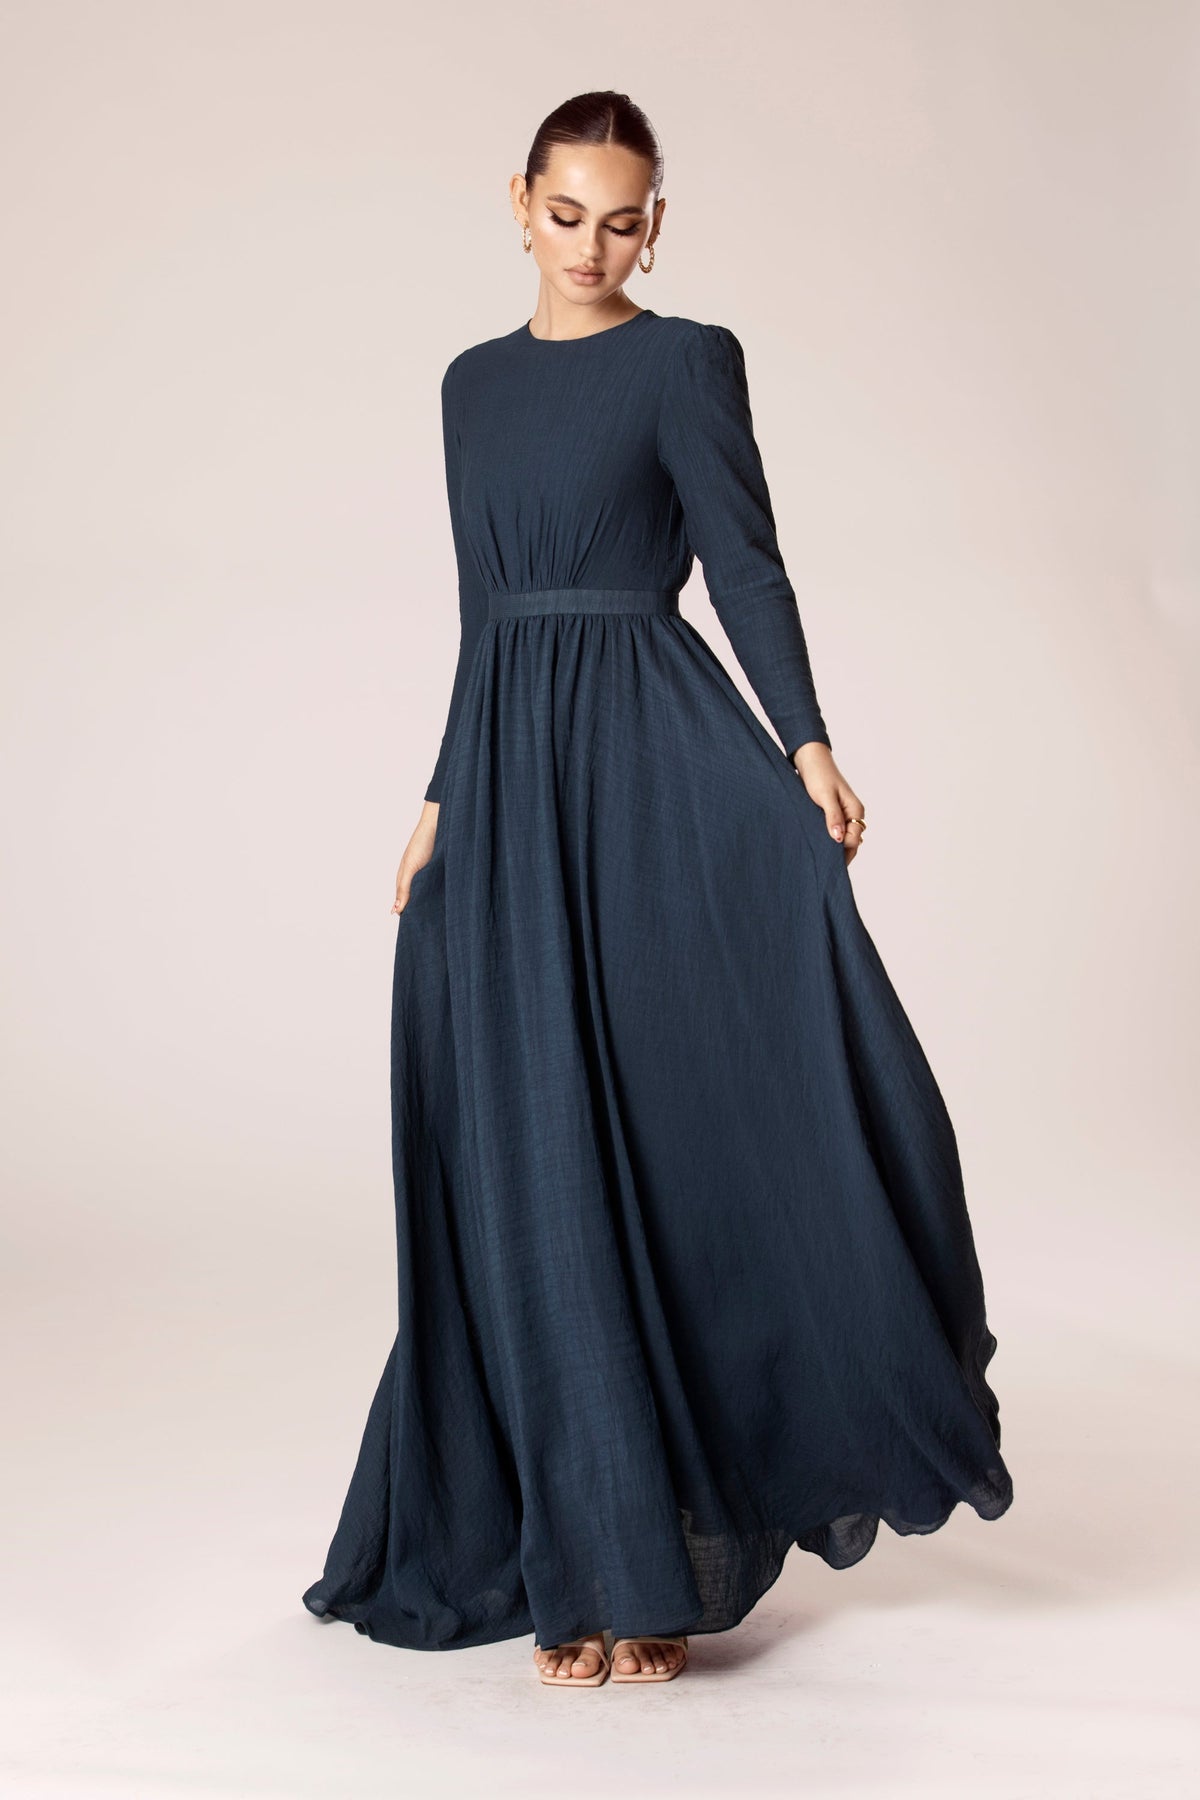 Lana Textured A Line Maxi Dress - French Navy epschoolboard 